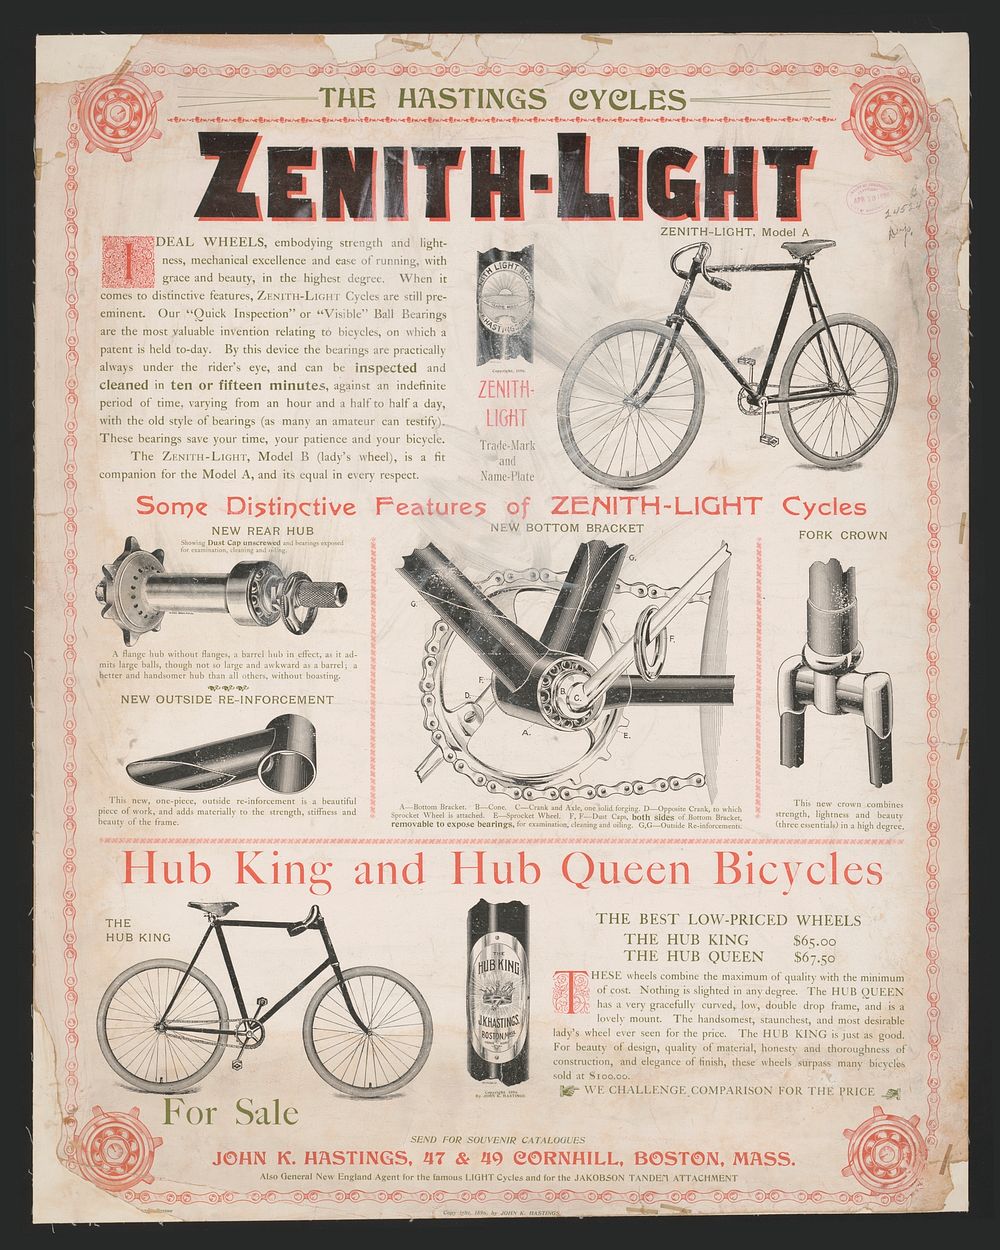 The Hastings Cycles, Zenith-Light